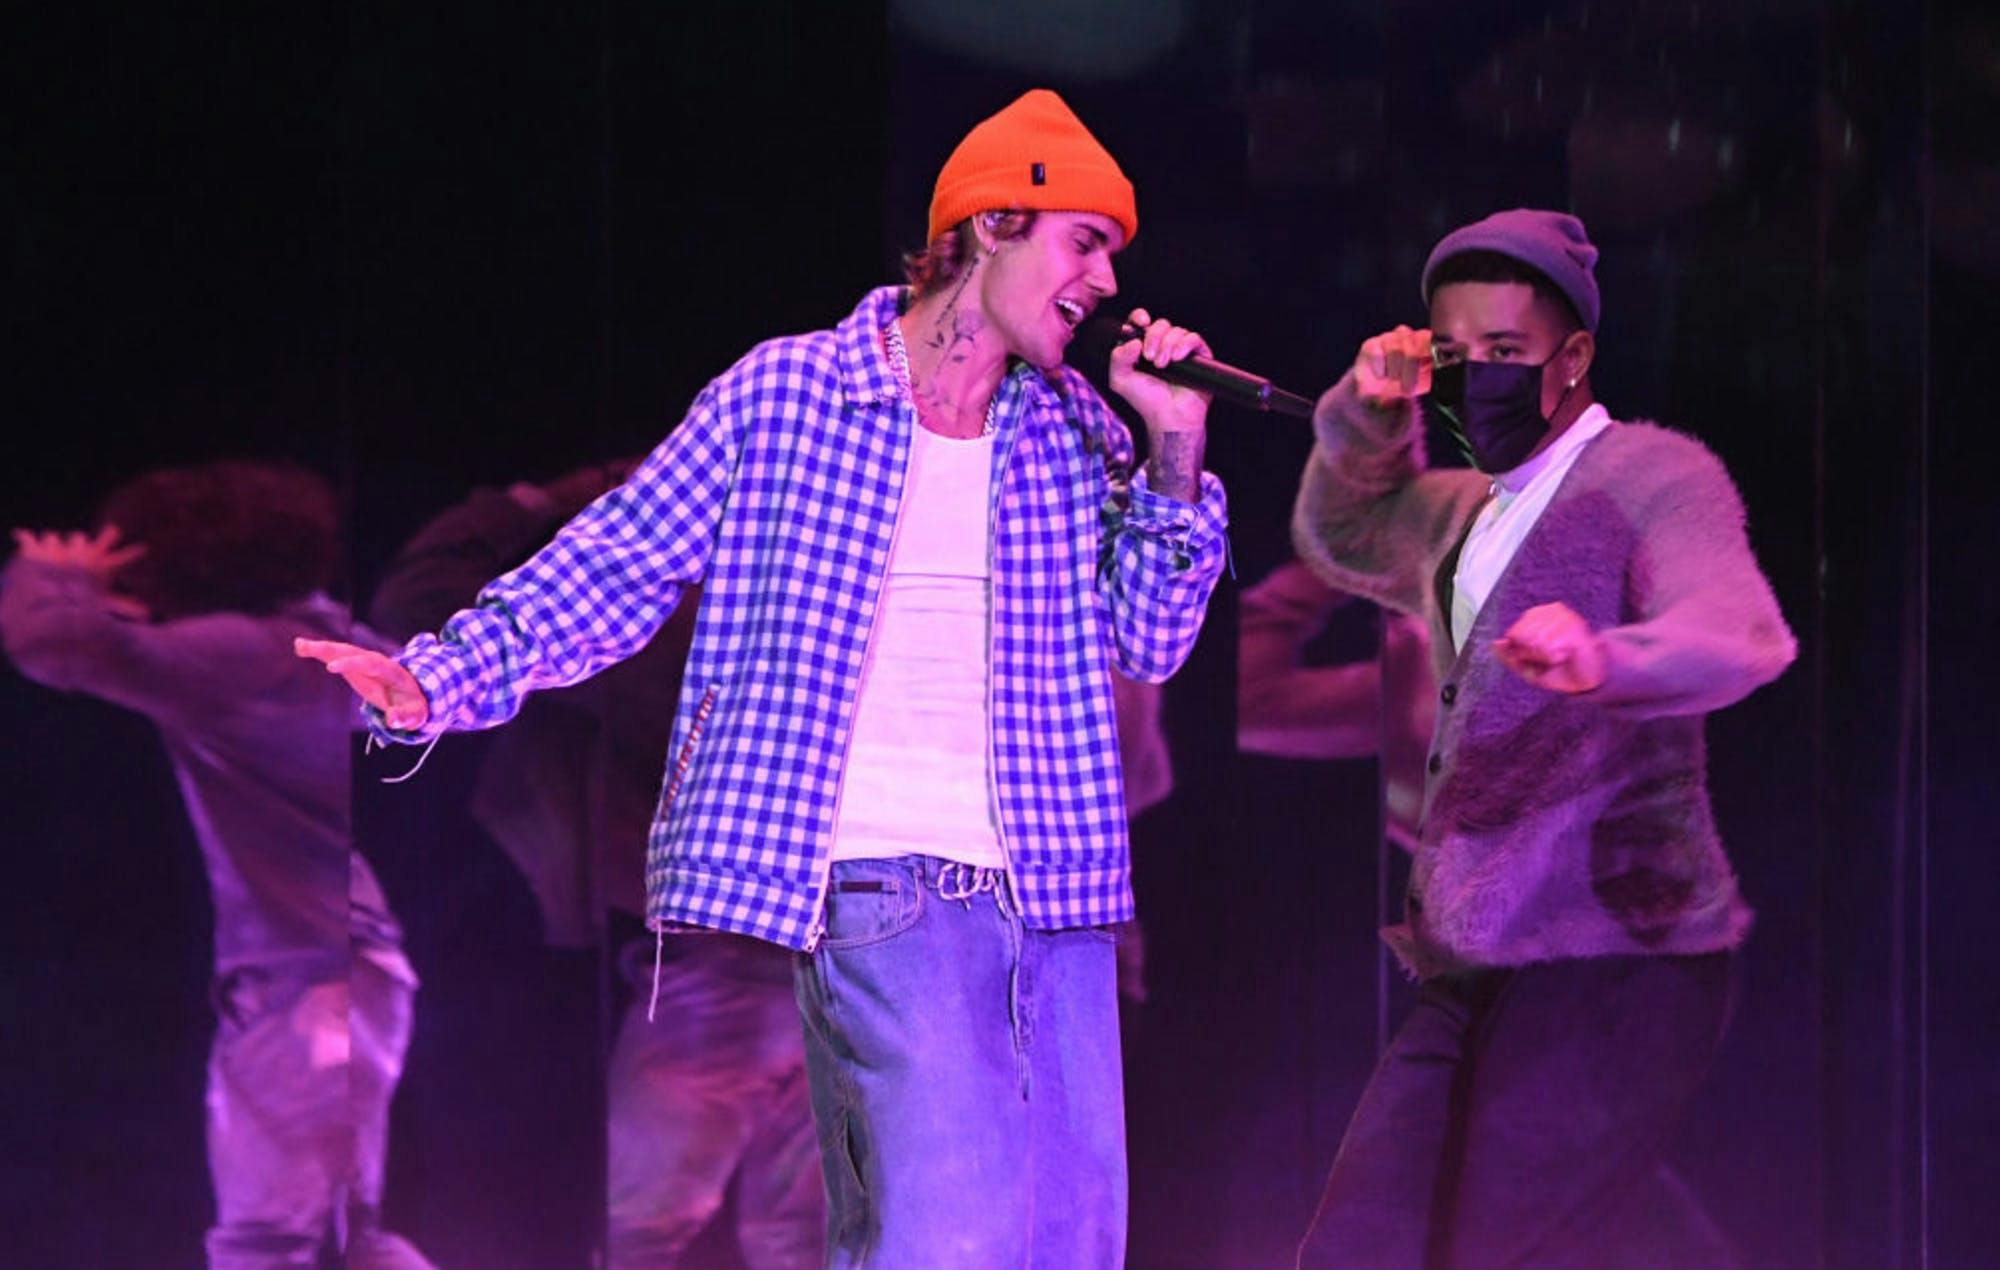 Justin Bieber singing while wearing jeans, a white shirt, a checkered jacket, and an orange beanie. Background dancers can be seen. 